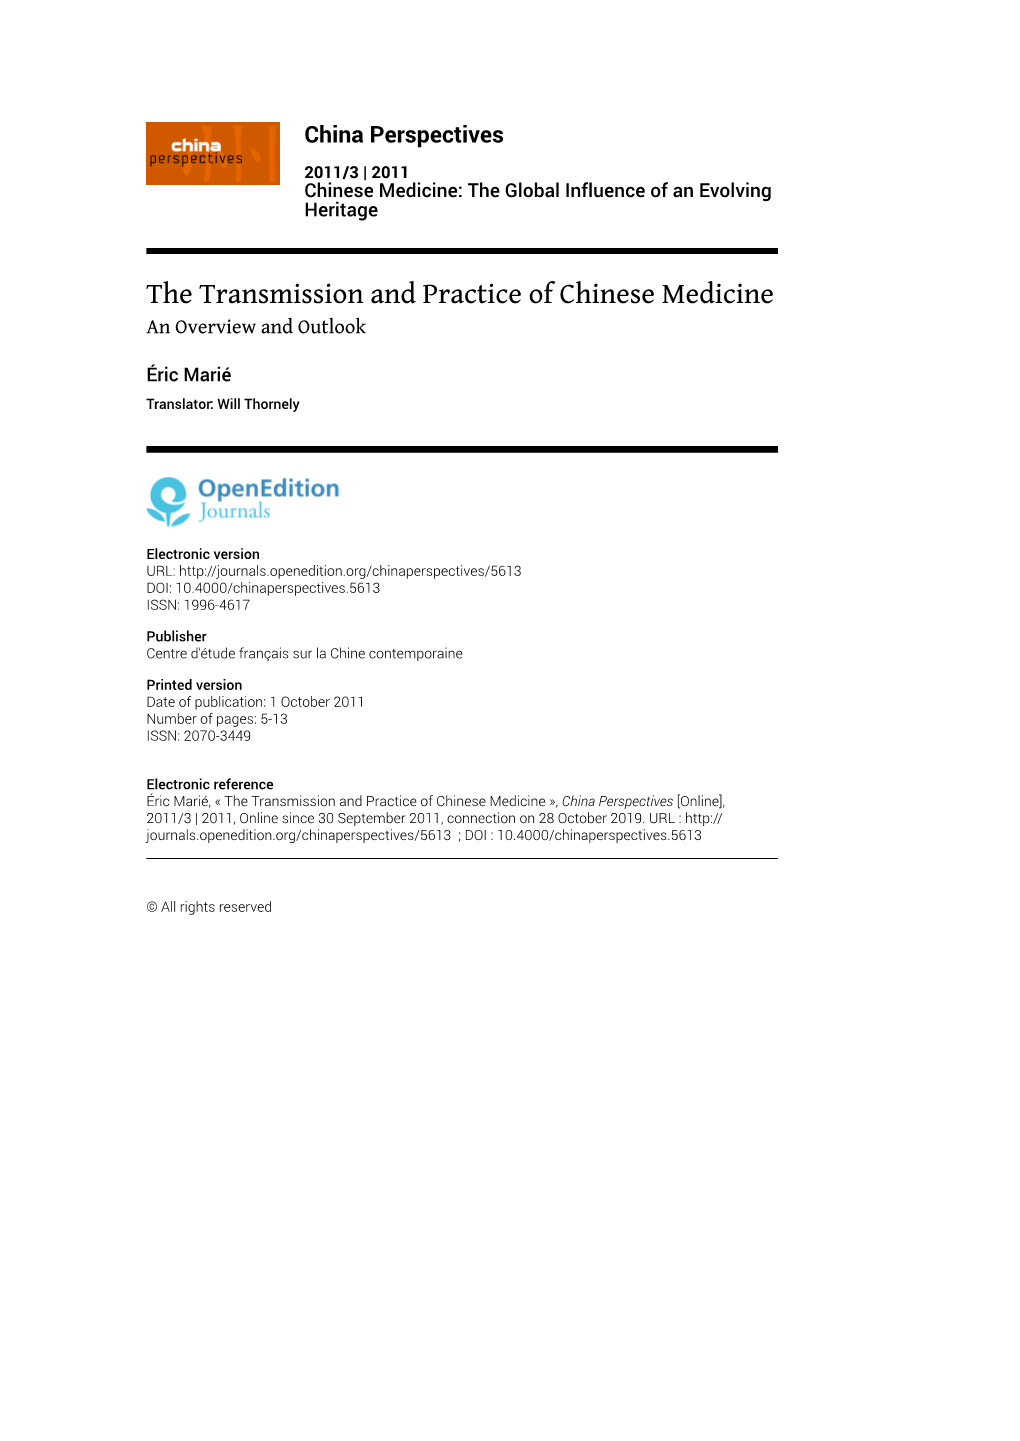 The Transmission and Practice of Chinese Medicine an Overview and Outlook